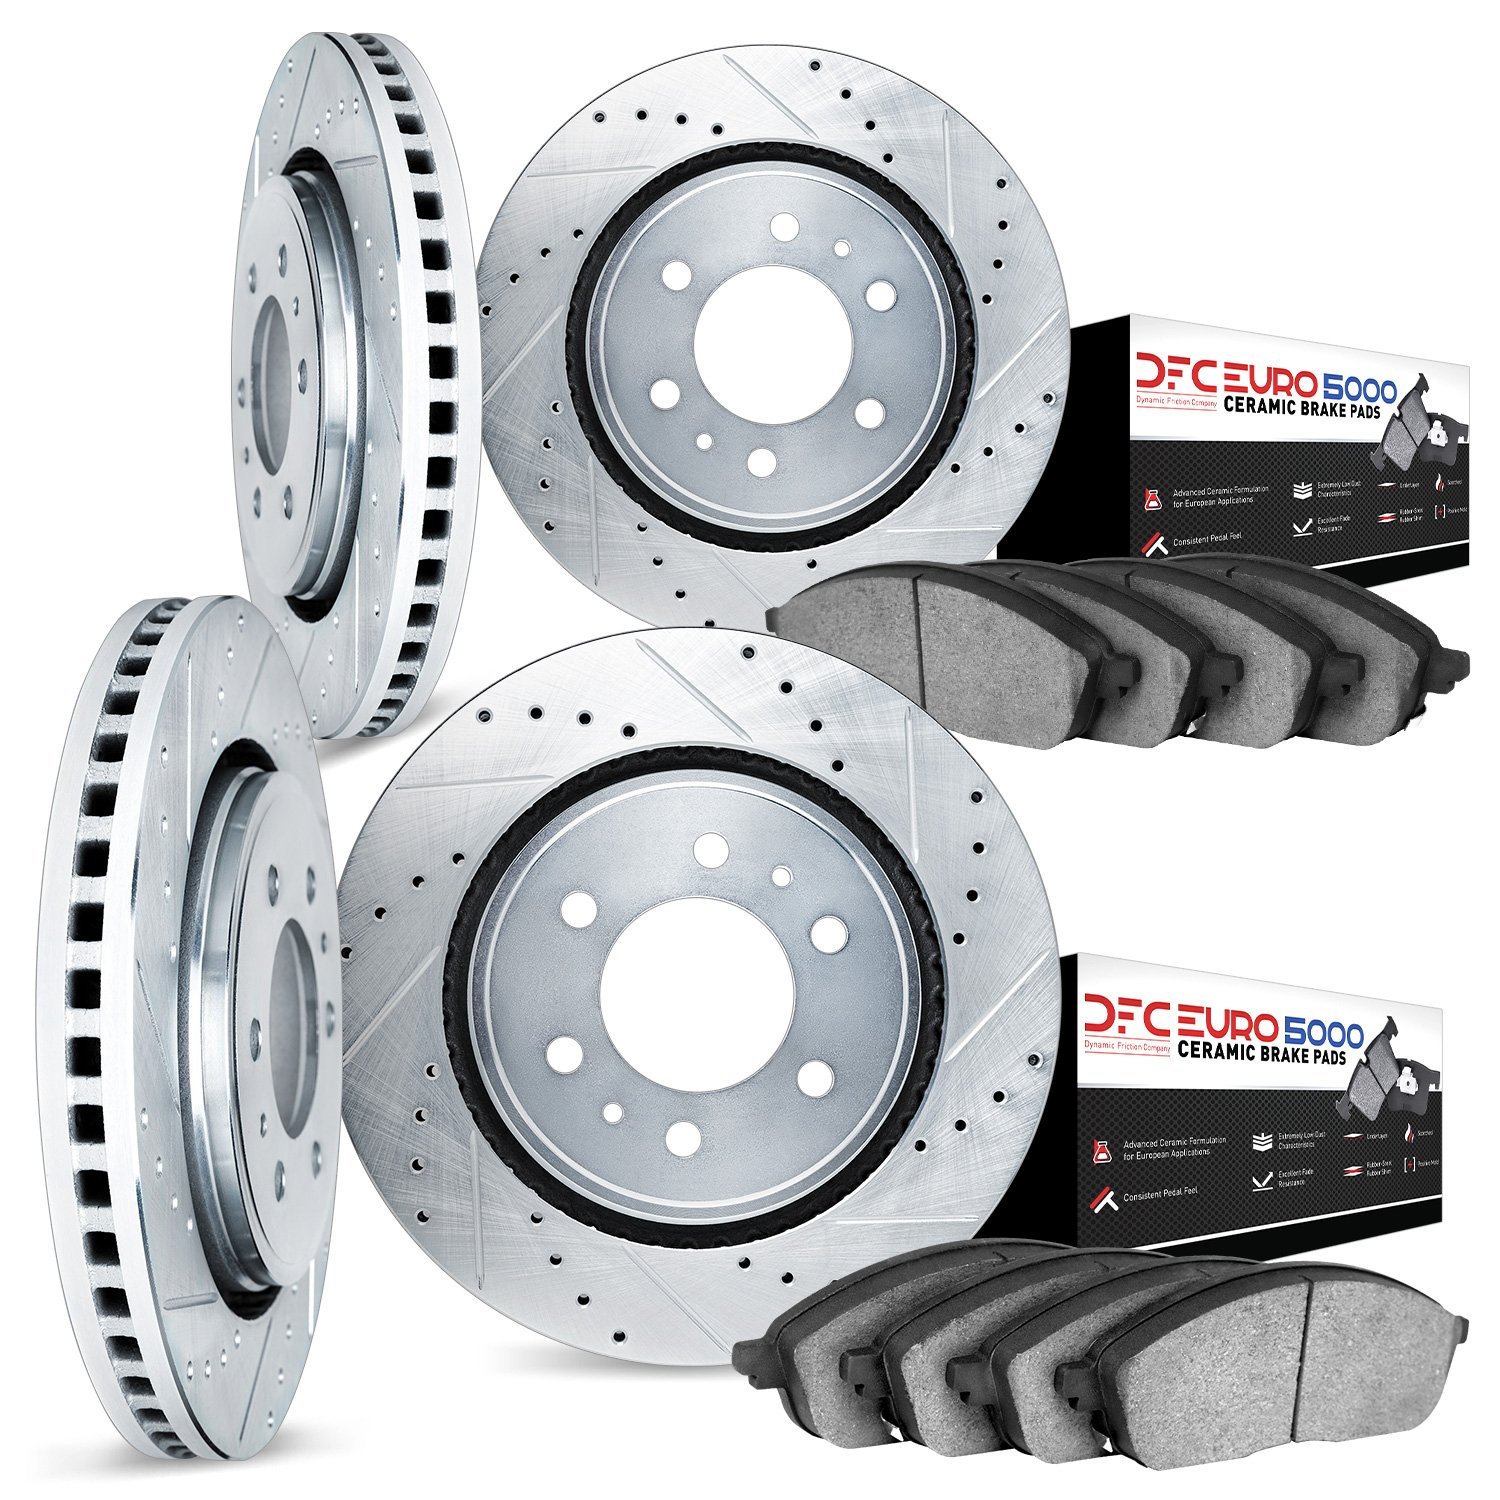 7604-48002 Drilled/Slotted Brake Rotors w/5000 Euro Ceramic Brake Pads Kit [Silver], 2006-2009 GM, Position: Front and Rear